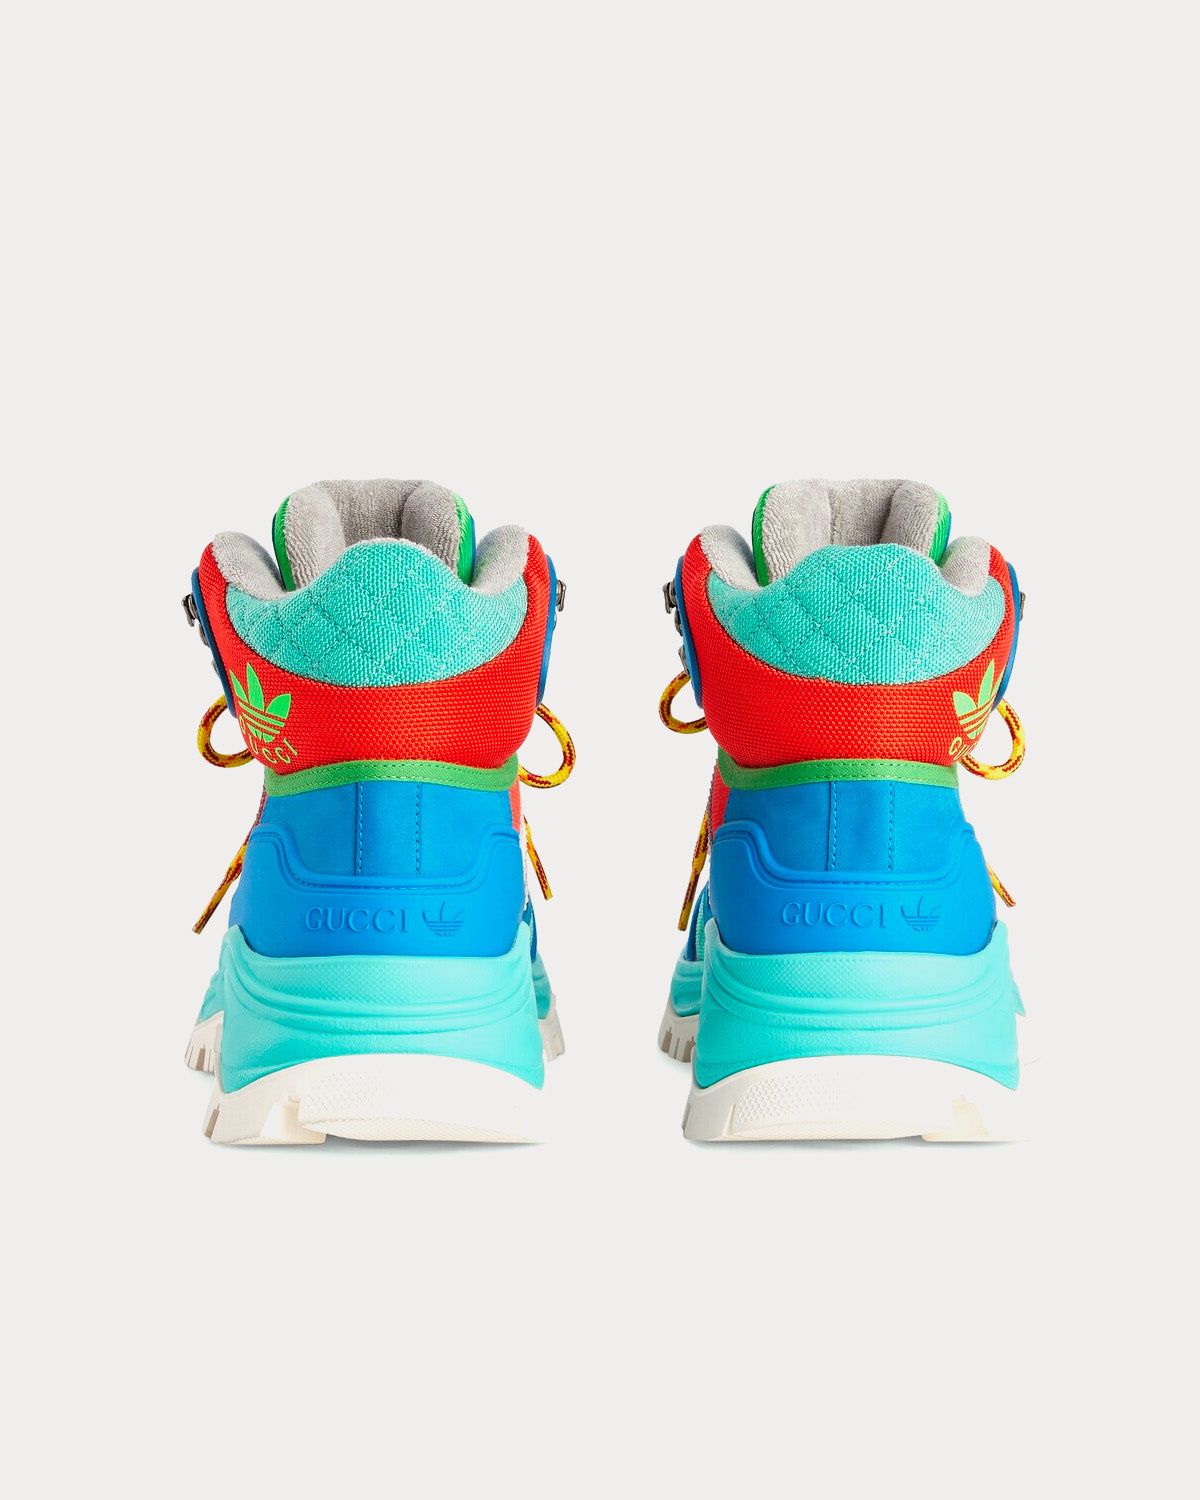 Adidas x Gucci - Lace-Up Technical Canvas Light Green / Blue / Red High Top Sneakers